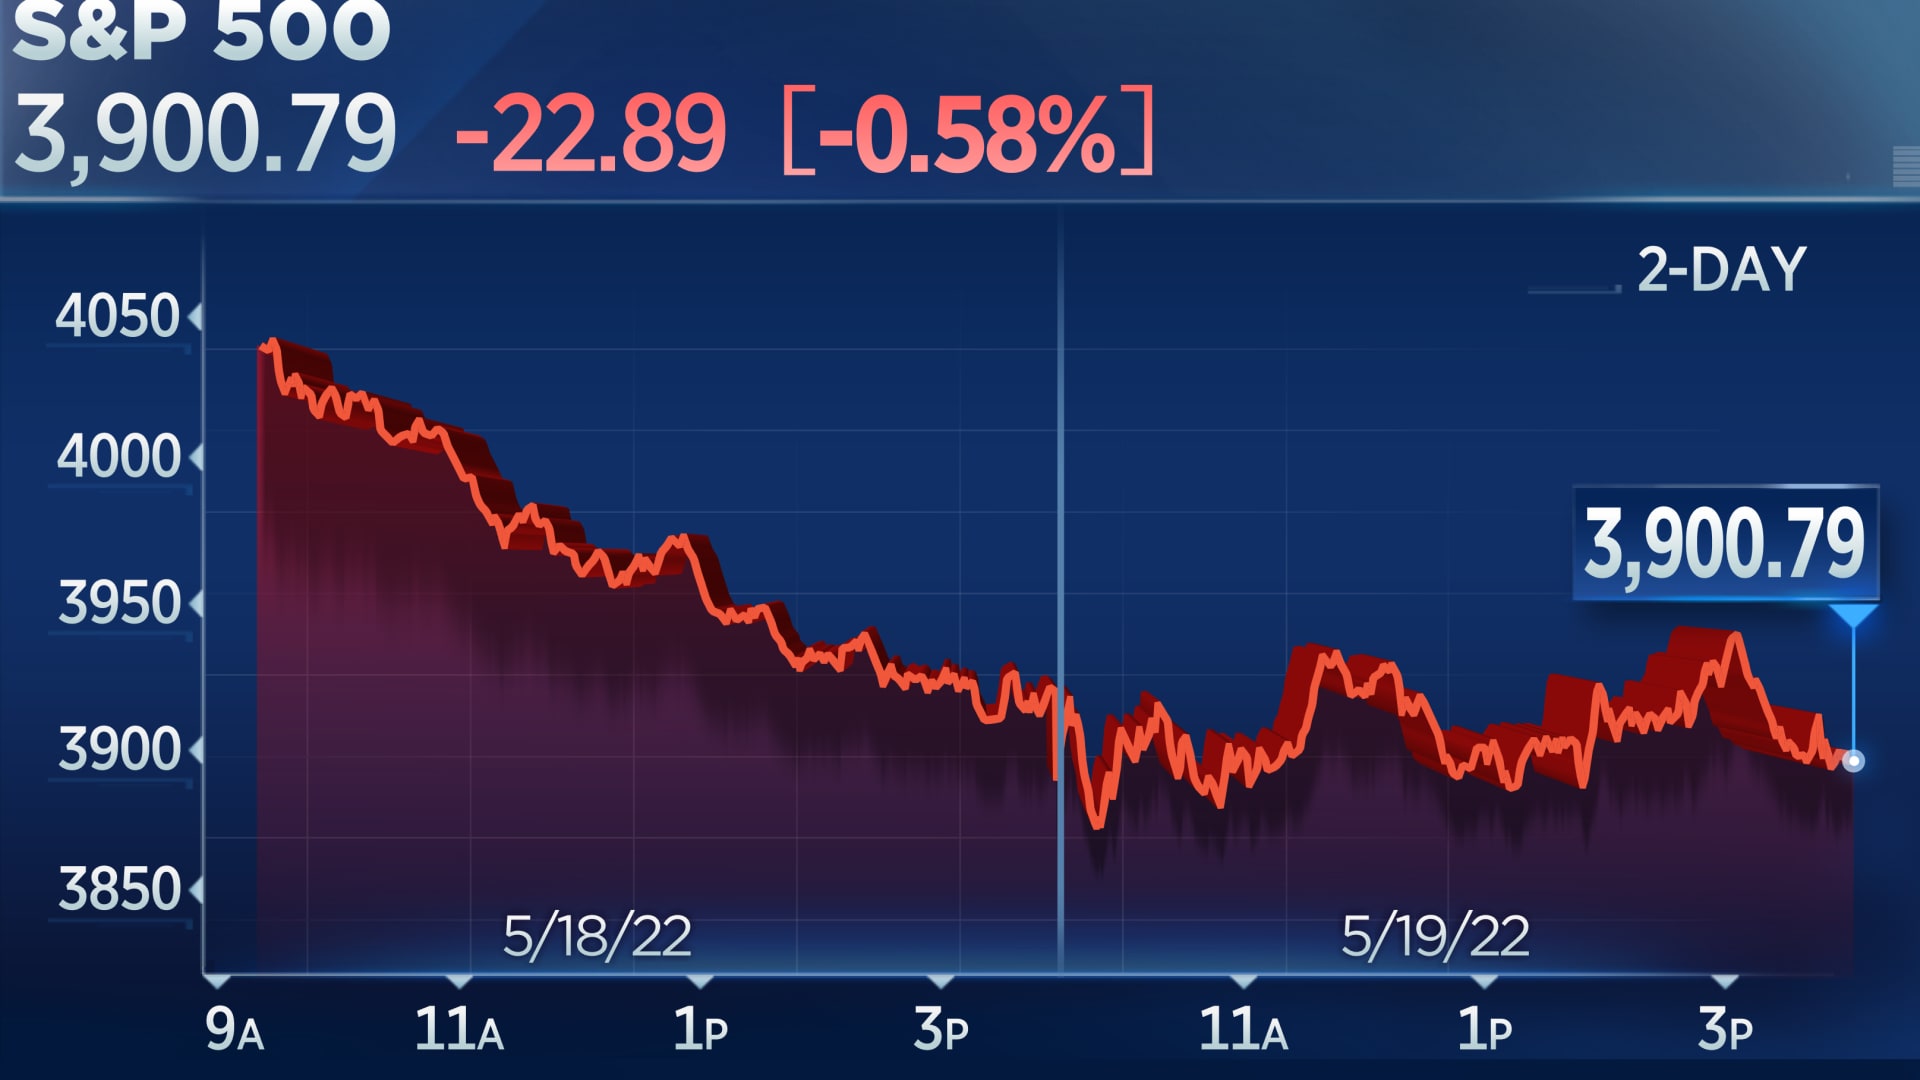 S&P 500 falls again on Thursday, inching closer to bear market territory